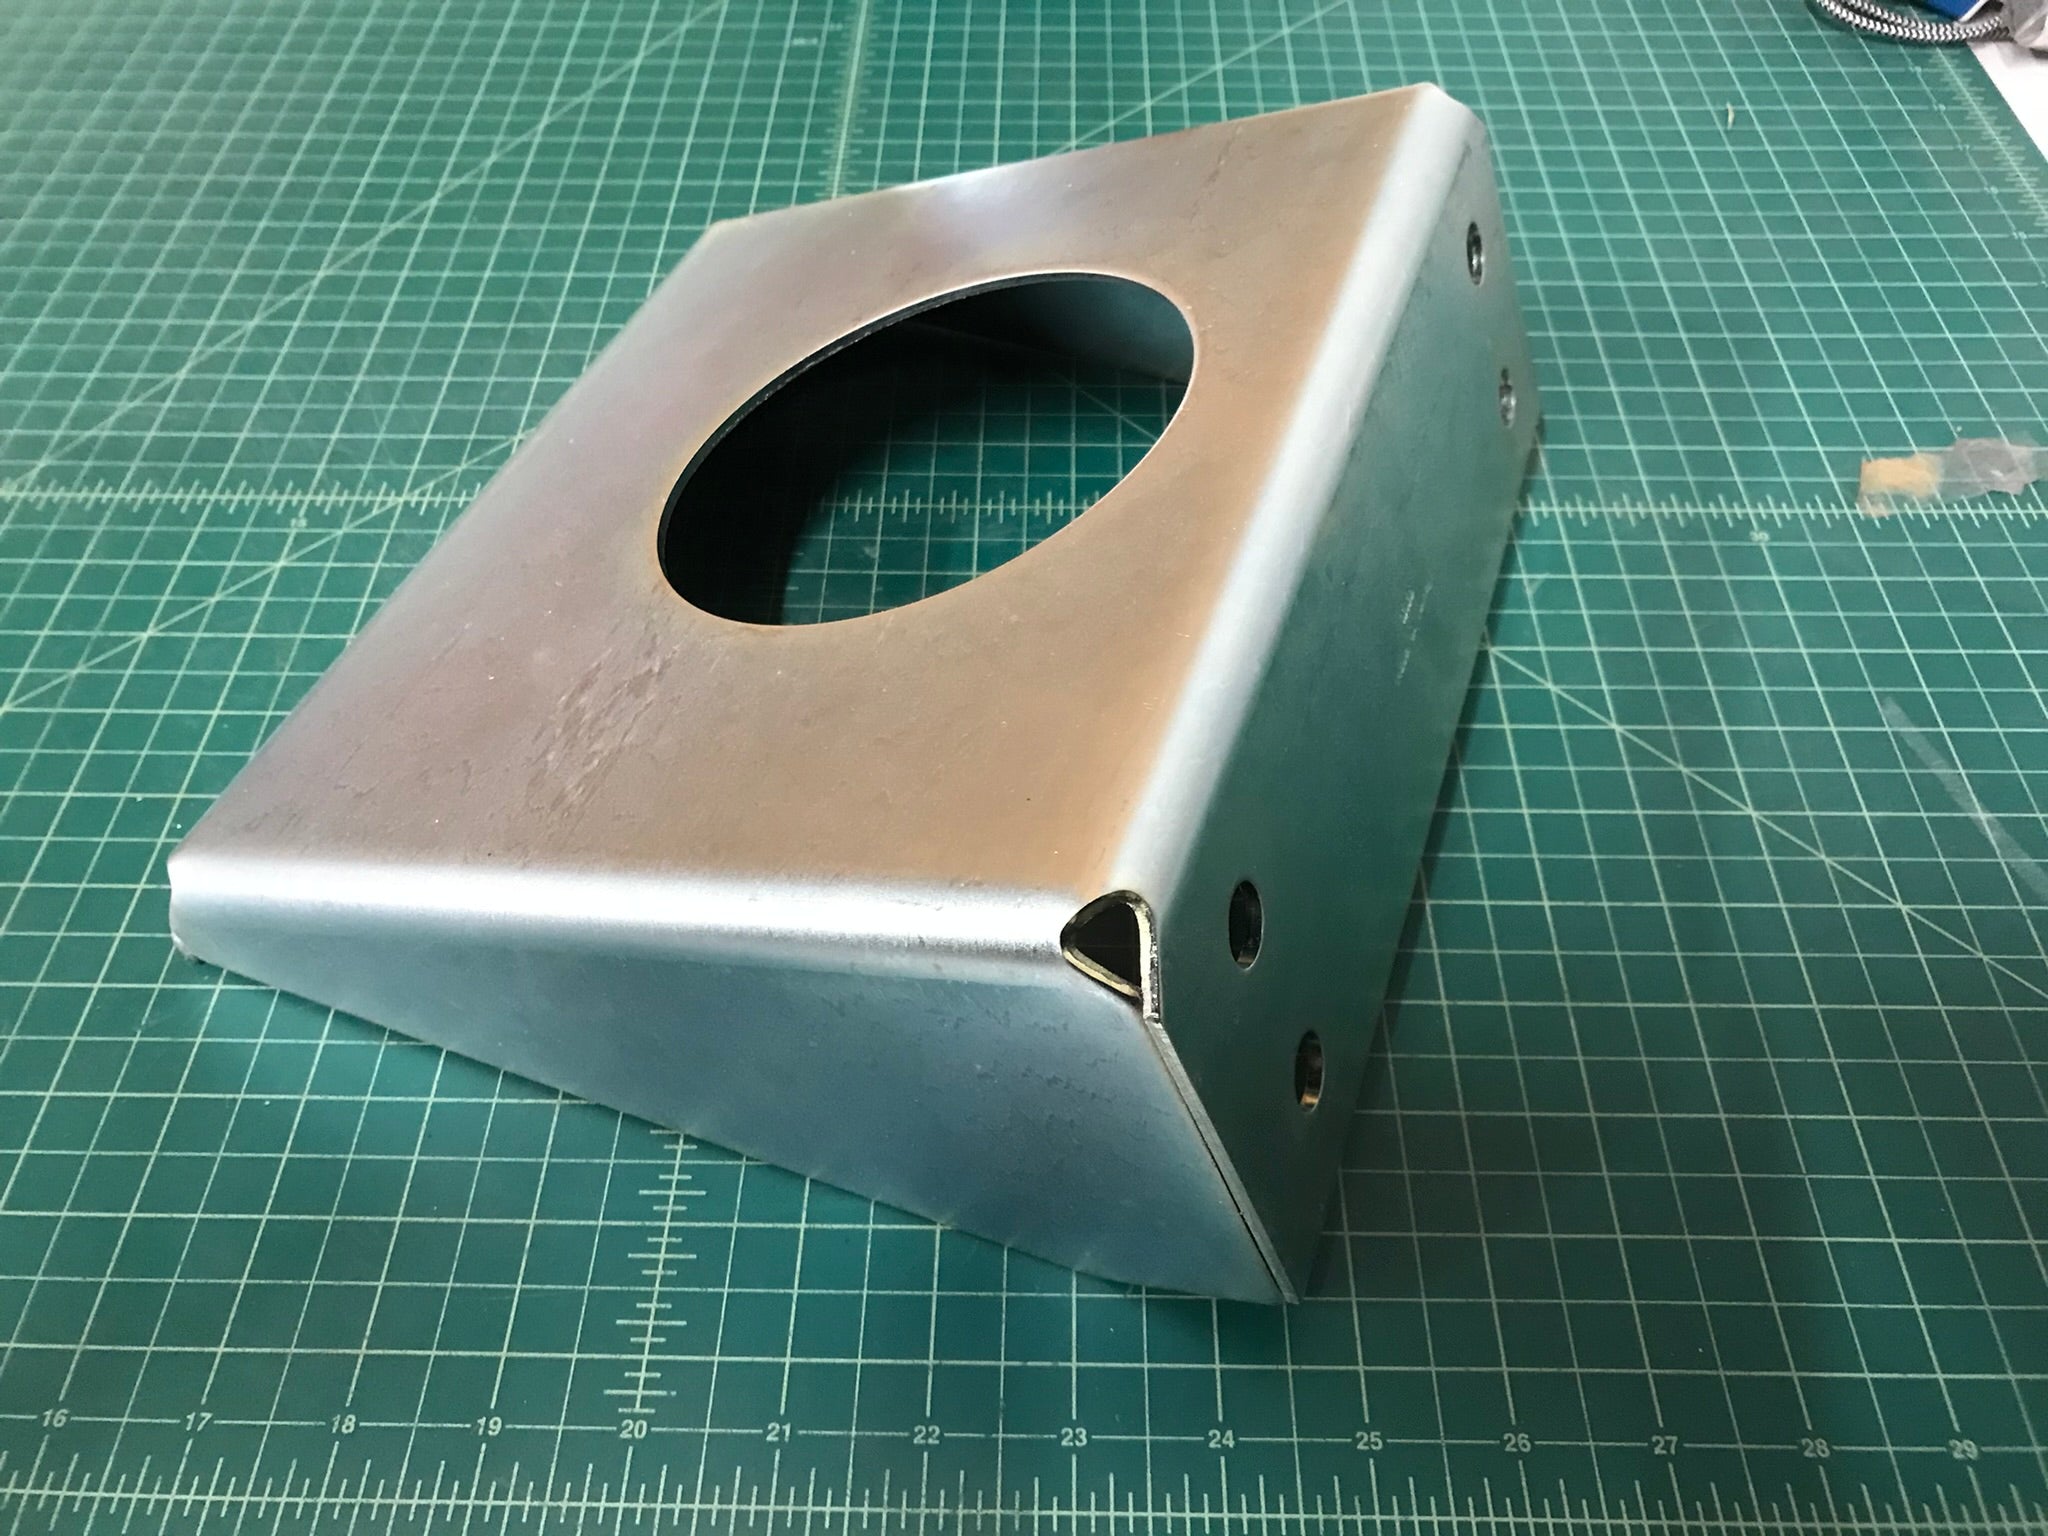 Mounting Bracket for AC